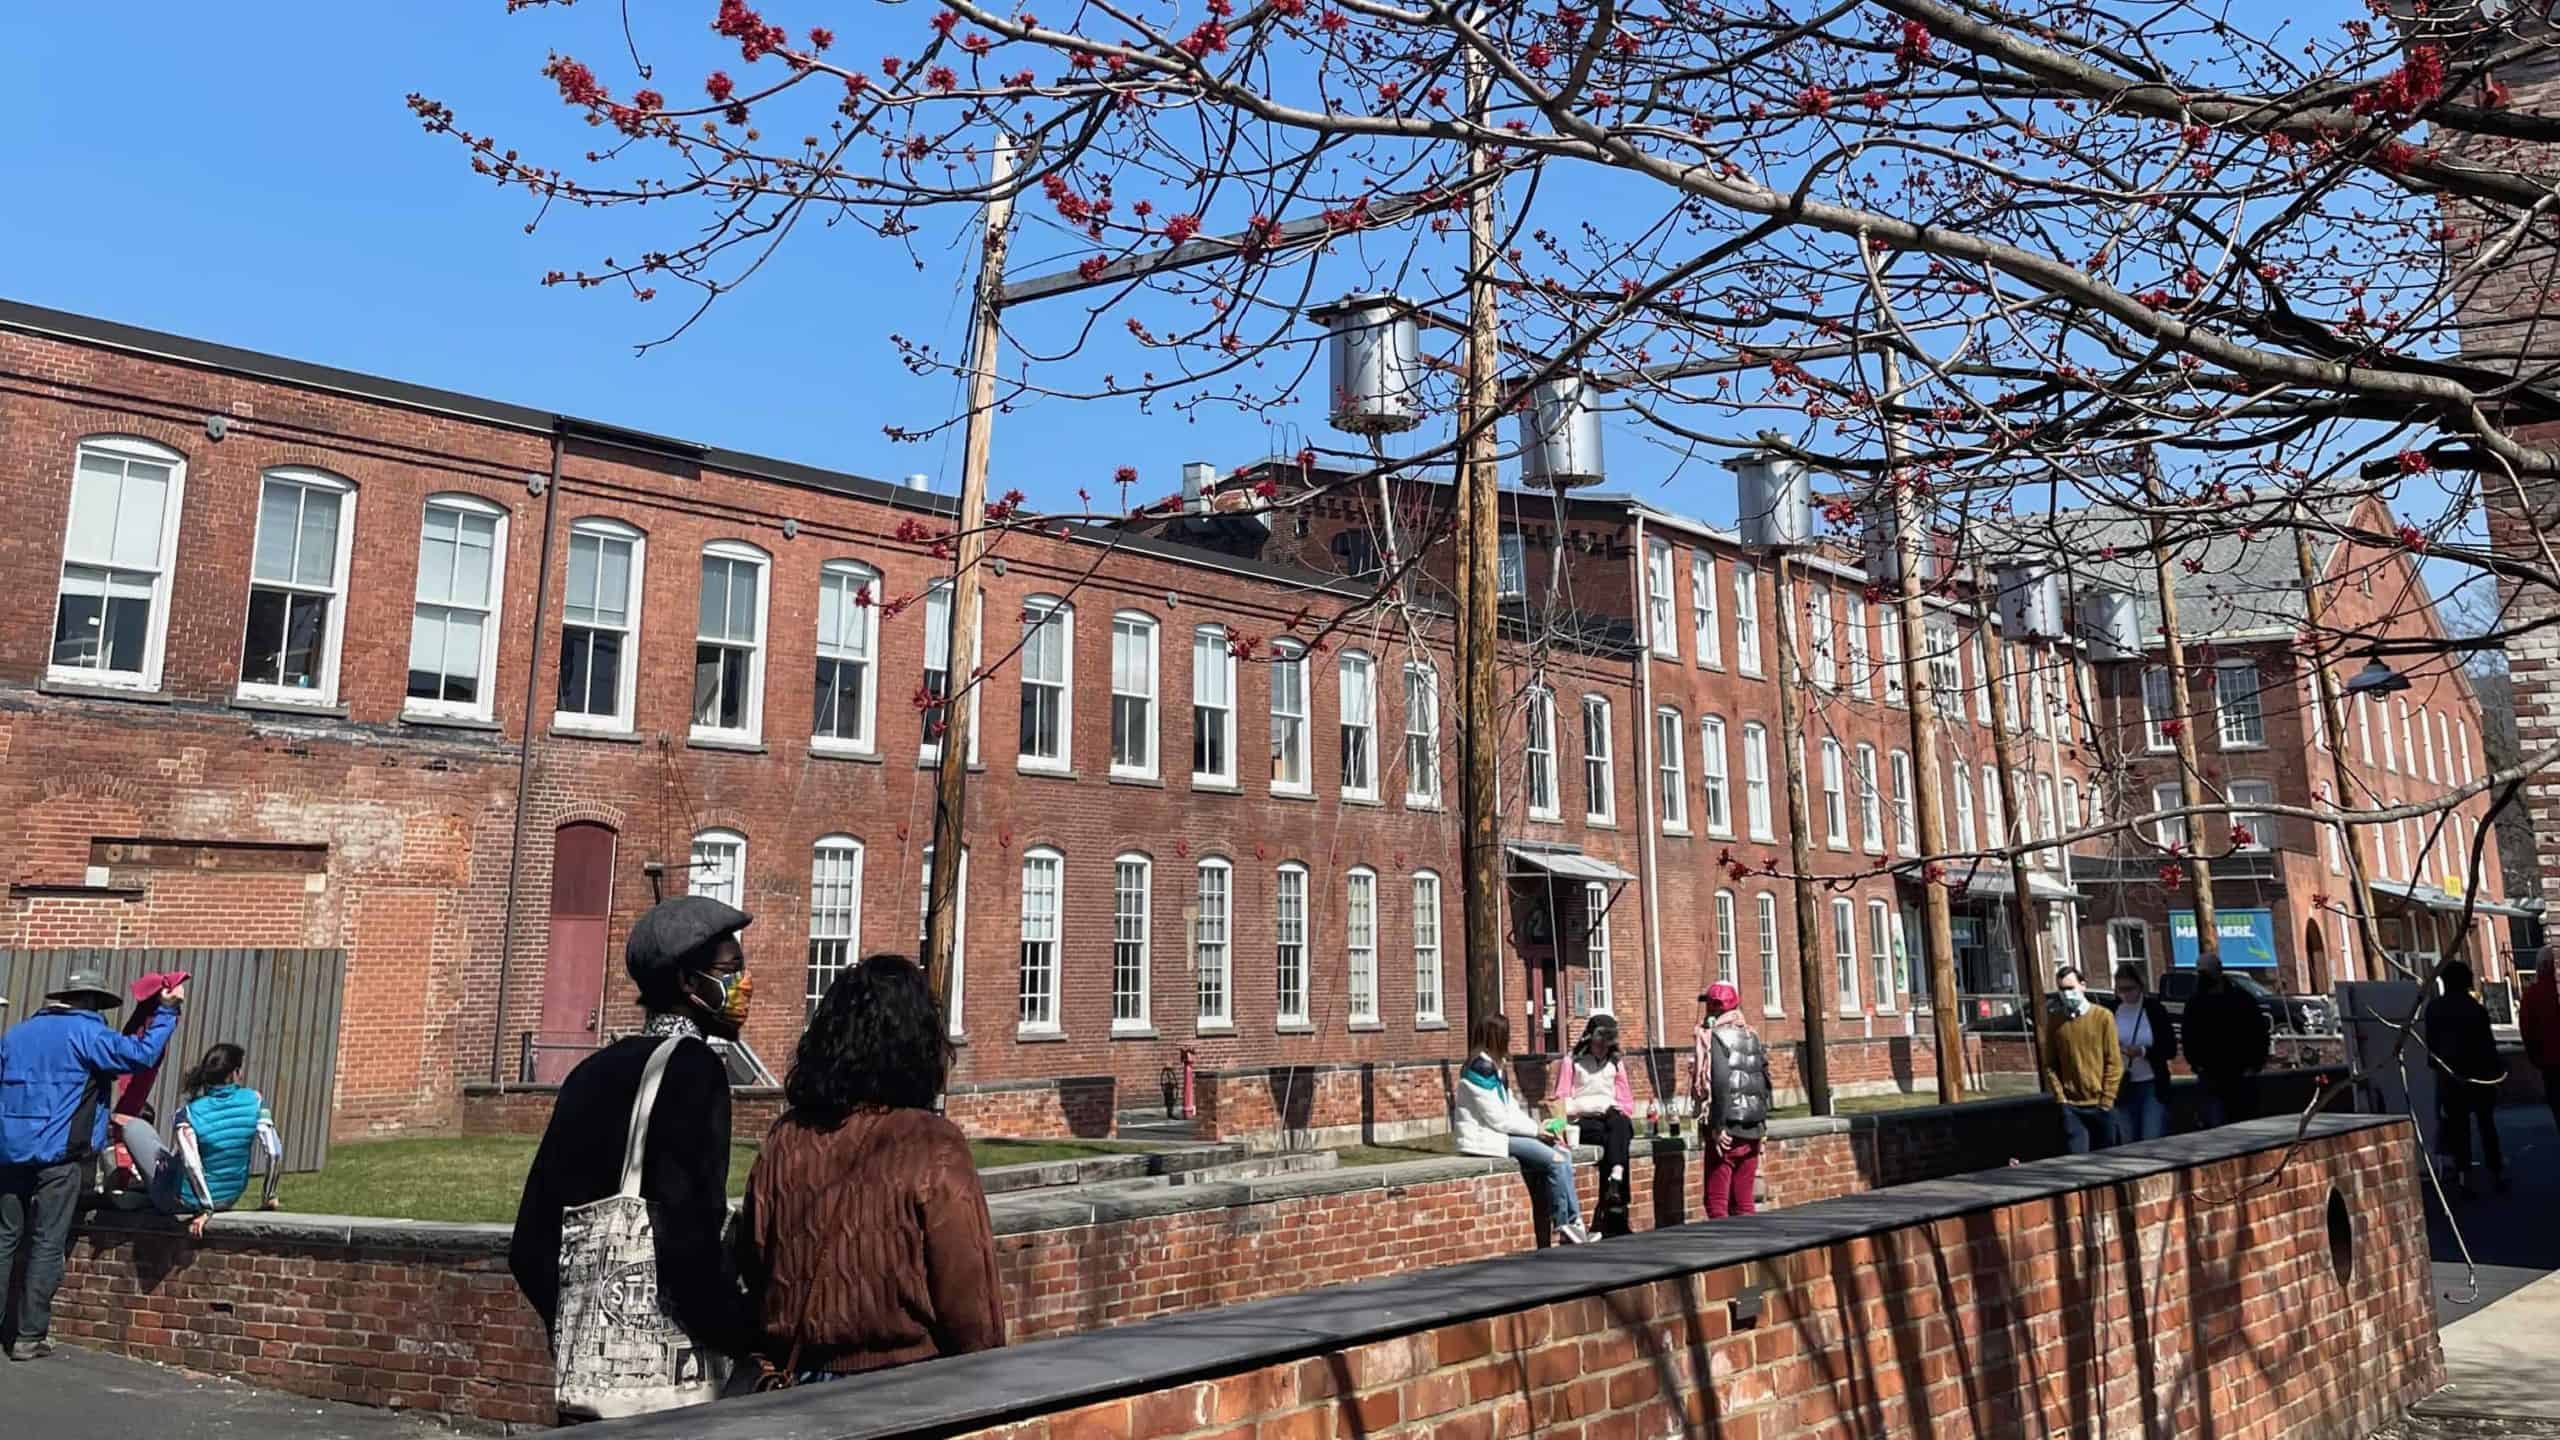 Visitors cross the courtyard at Mass MoCA in early spring.